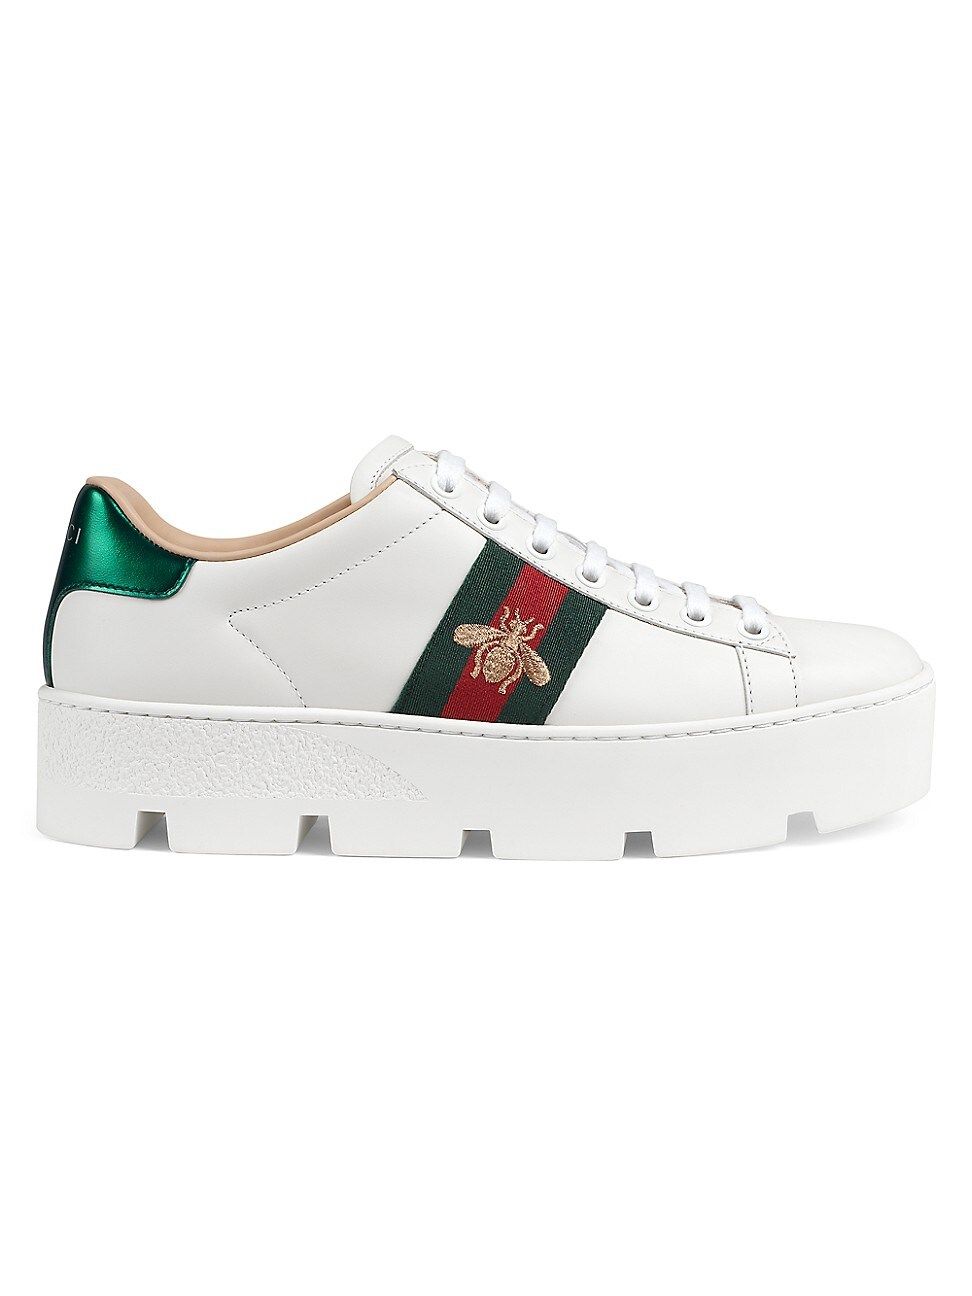 Gucci Women's New Ace Platform Bee Sneakers - White - Size 5 | Saks Fifth Avenue